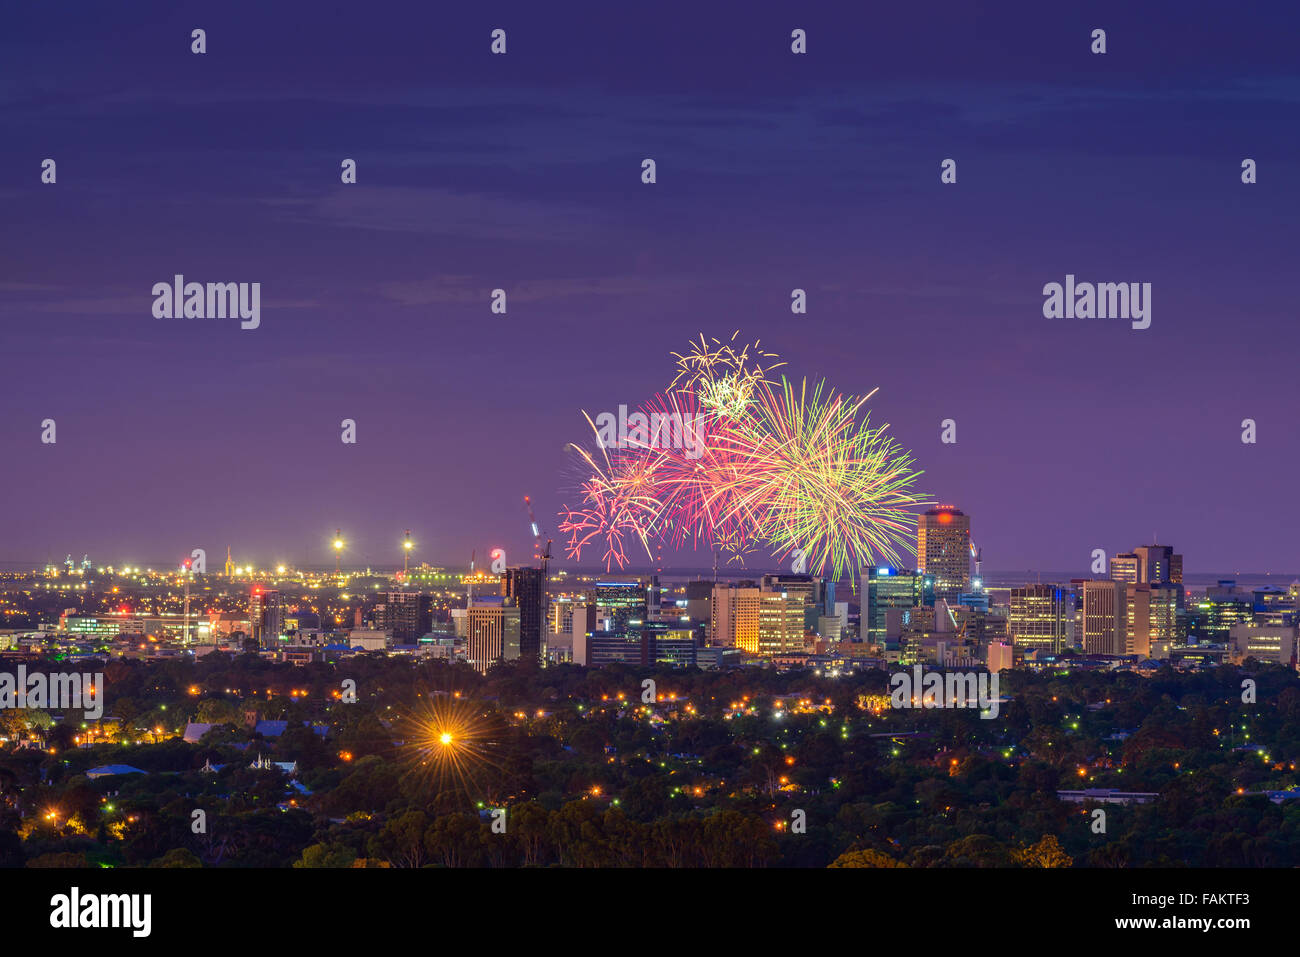 New Year Fireworks display in Adelaide, South Australia Stock Photo